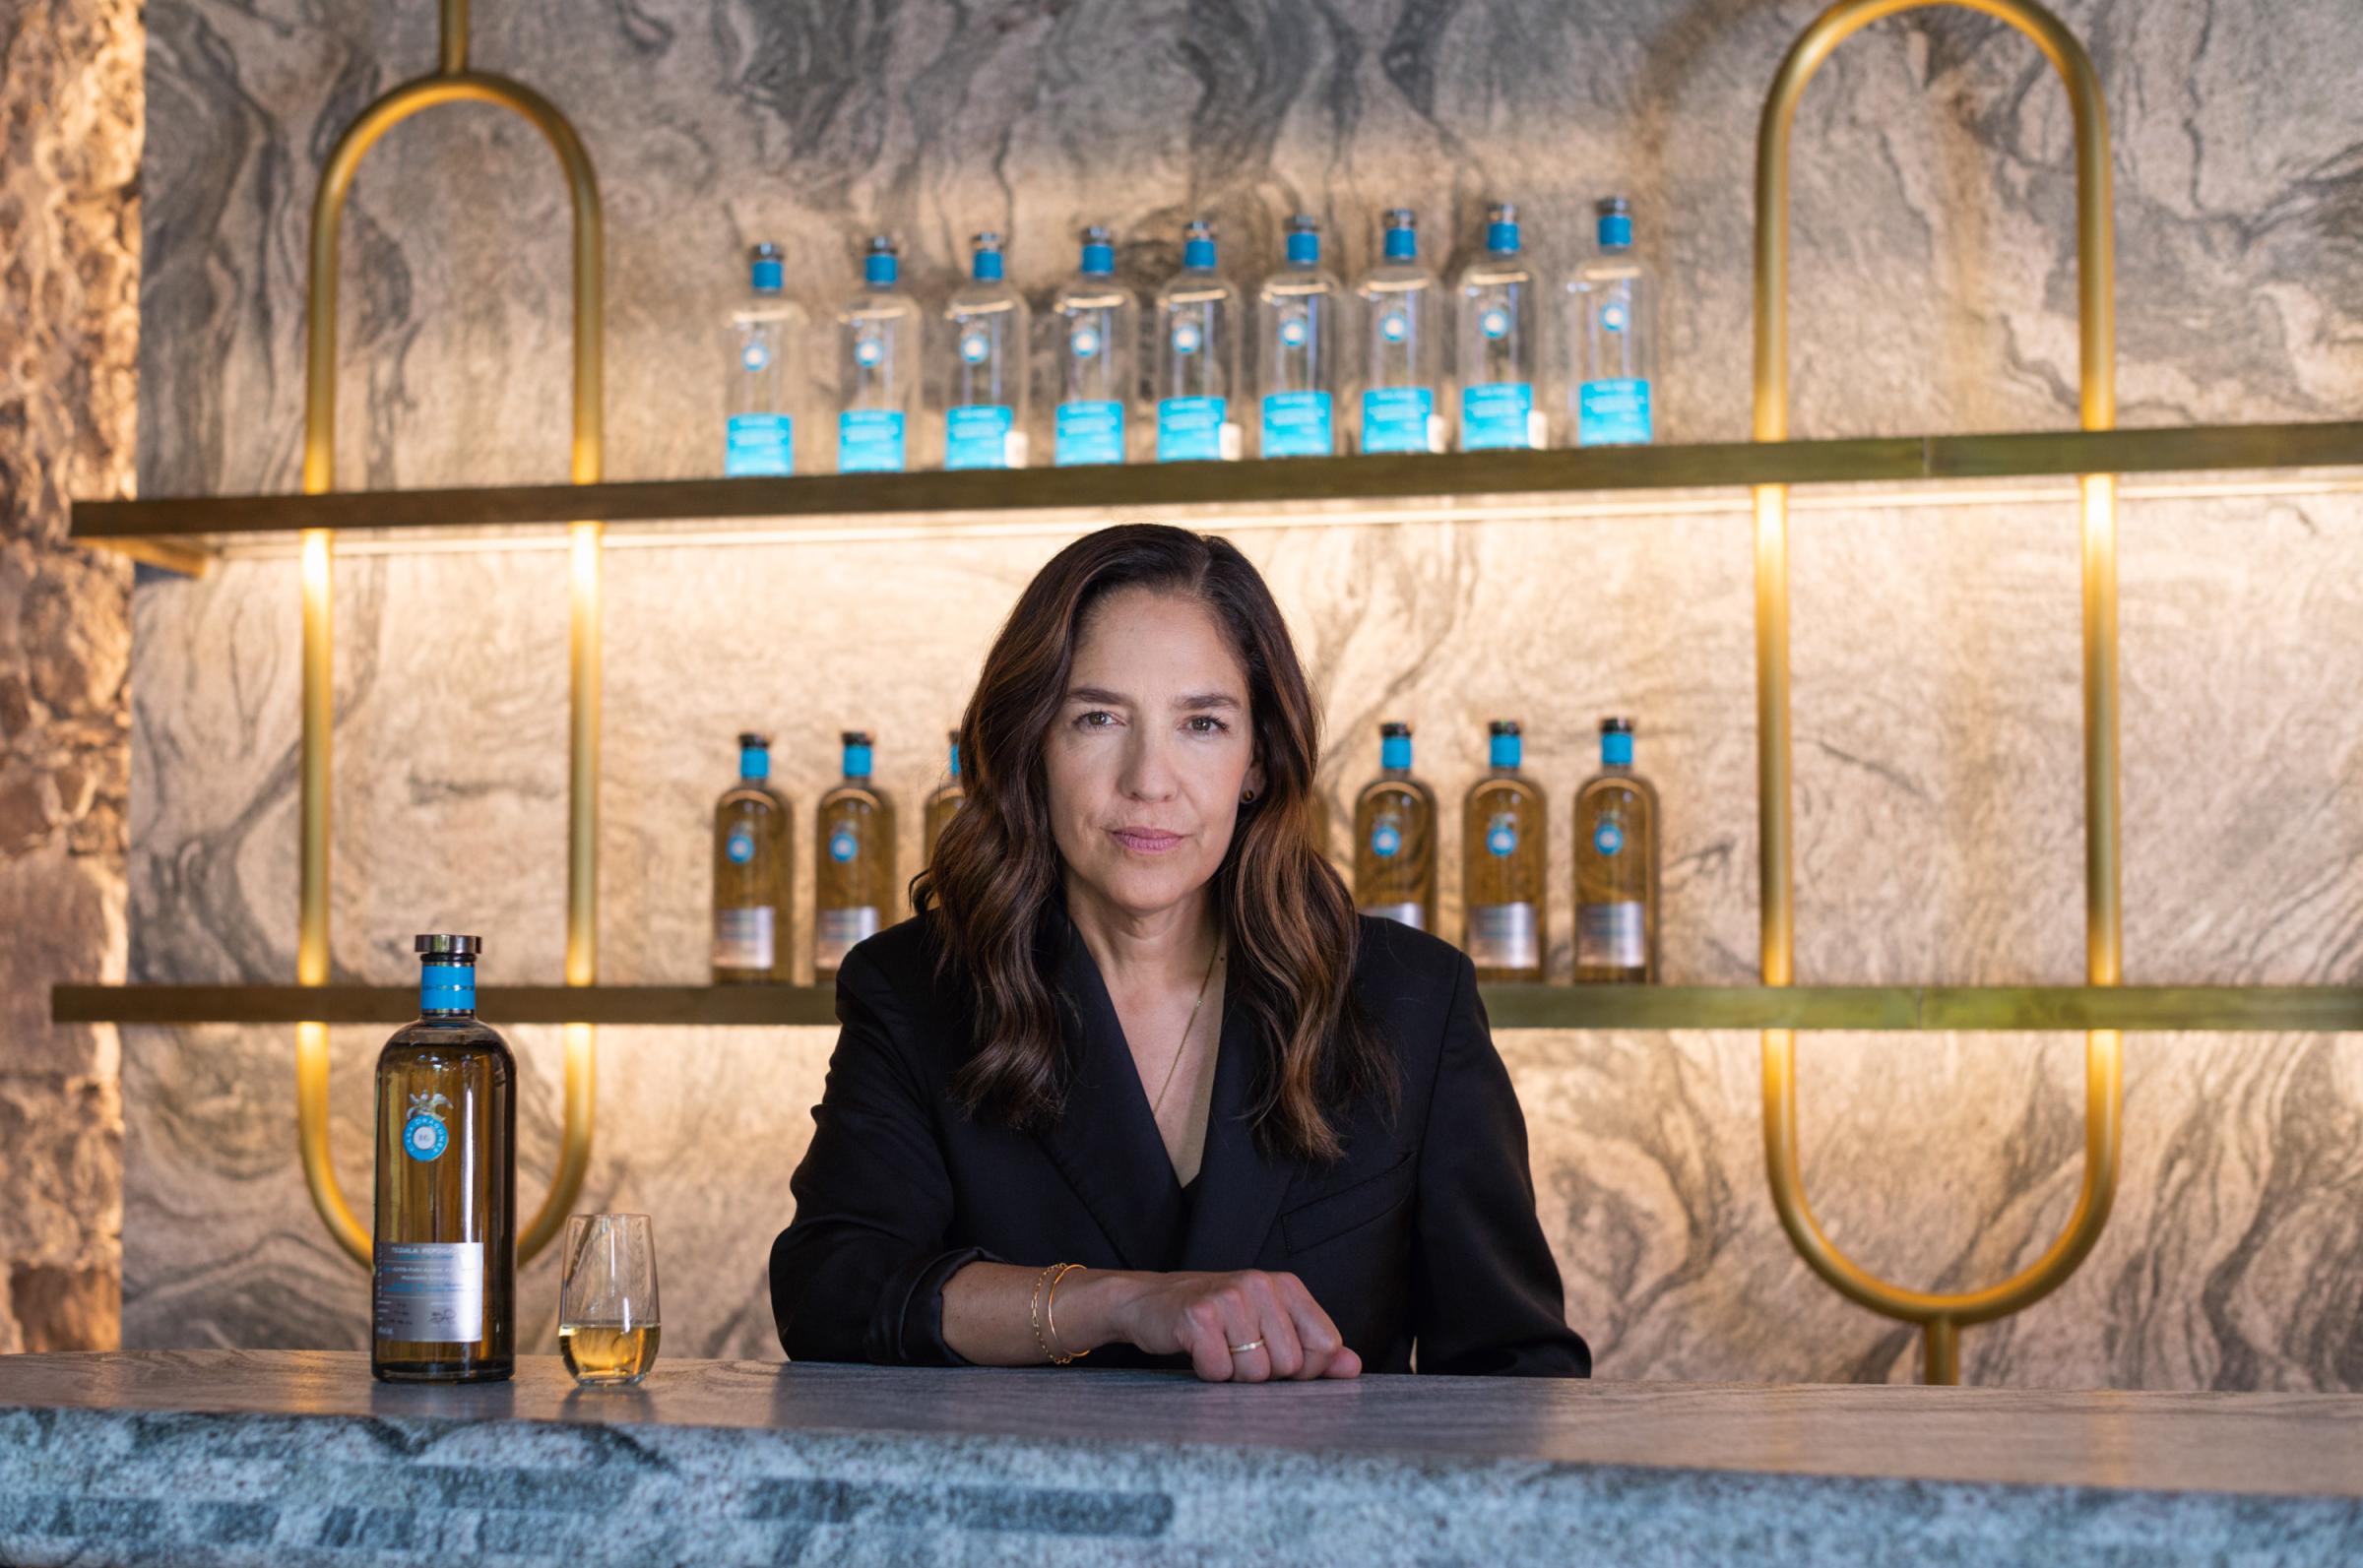  The New York Times - The Spirit Behind High-End Tequila